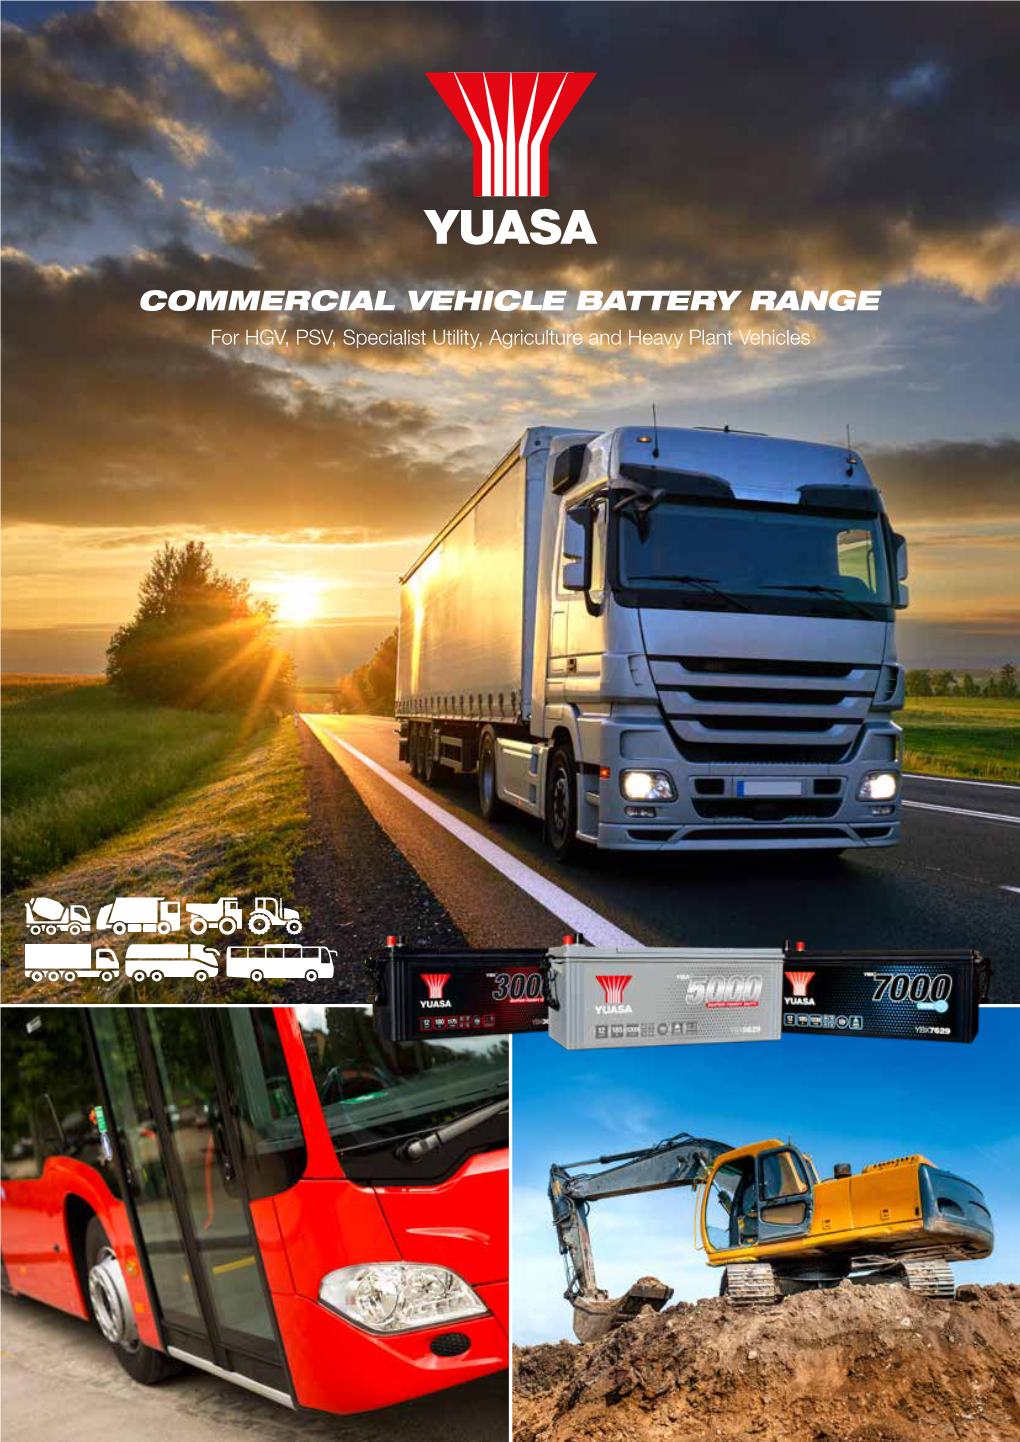 COMMERCIAL VEHICLE BATTERY RANGE for HGV, PSV, Specialist Utility, Agriculture and Heavy Plant Vehicles 100 YEARS of QUALITY, RELIABILITY & PERFORMANCE